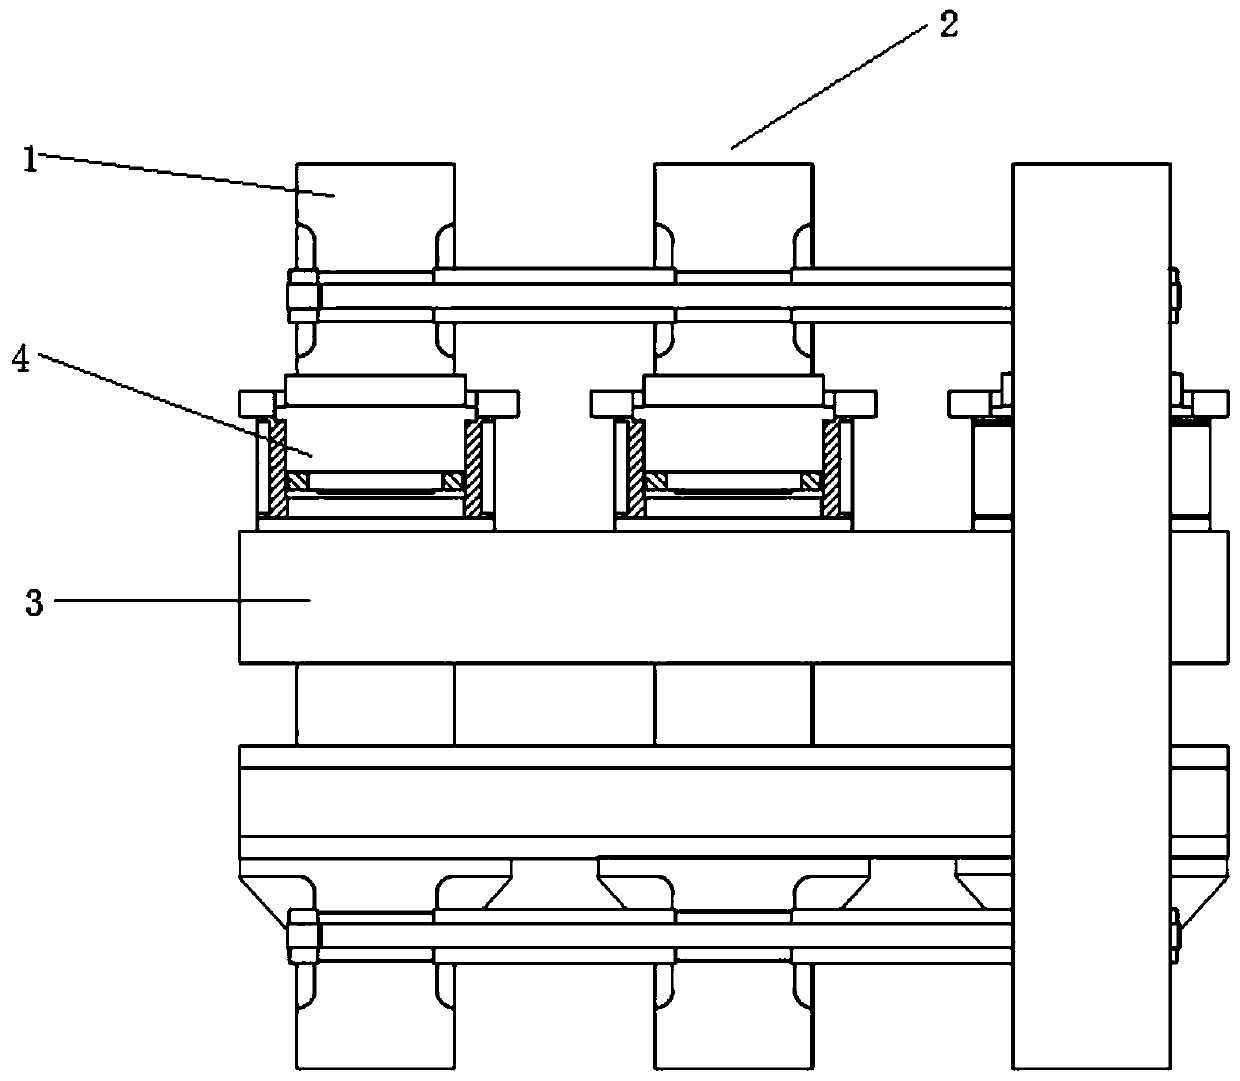 A 10,000-ton die forging press used for forging forgings with obvious cross-section changes